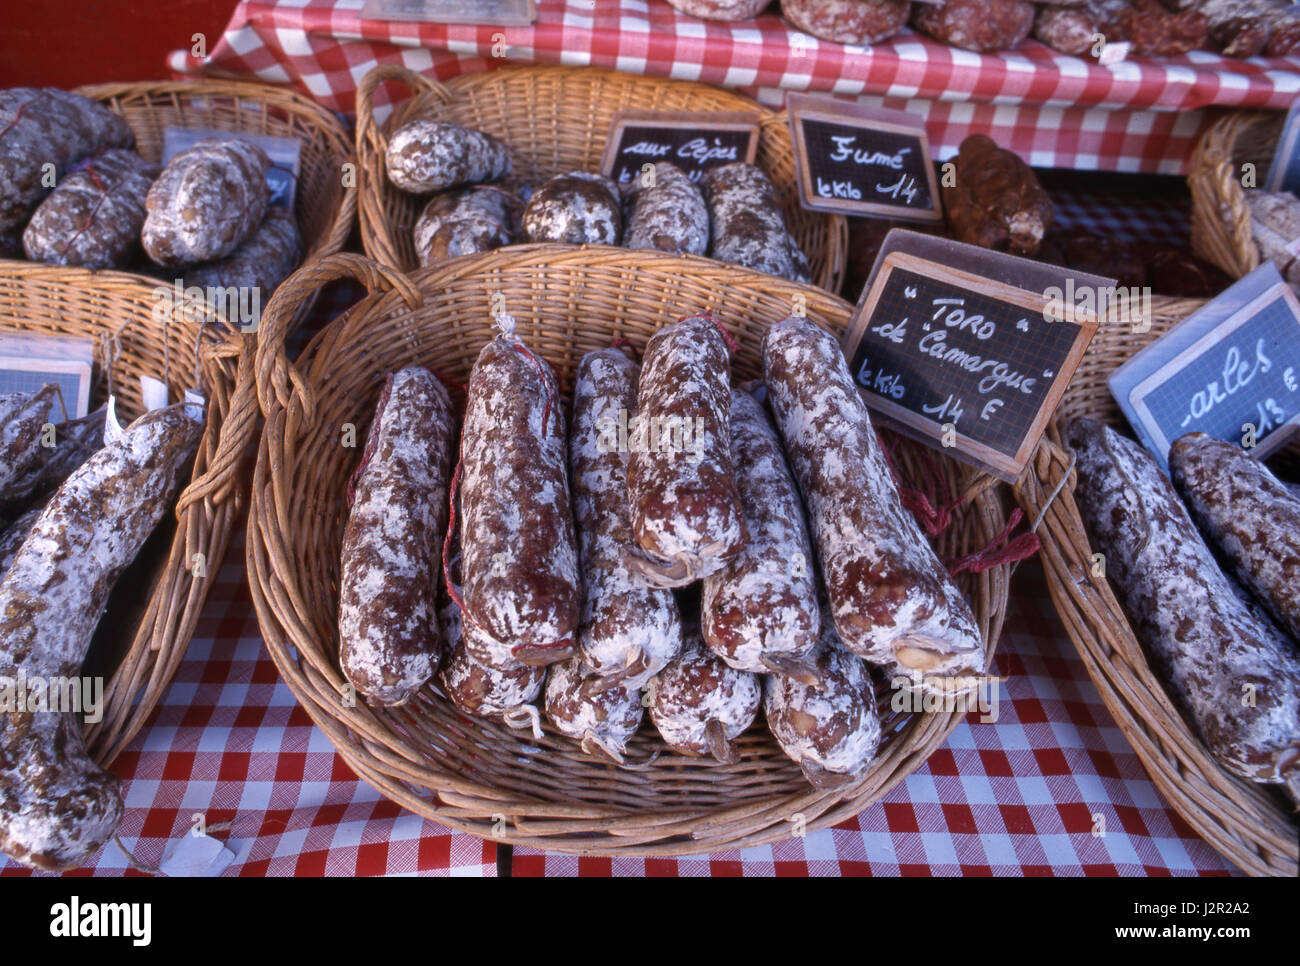 SAUCISSE French sausage display variety rustic Saucission on market stall euro price boards traditional Beaune town market, Beaune, Côte d'Or, France. Stock Photo